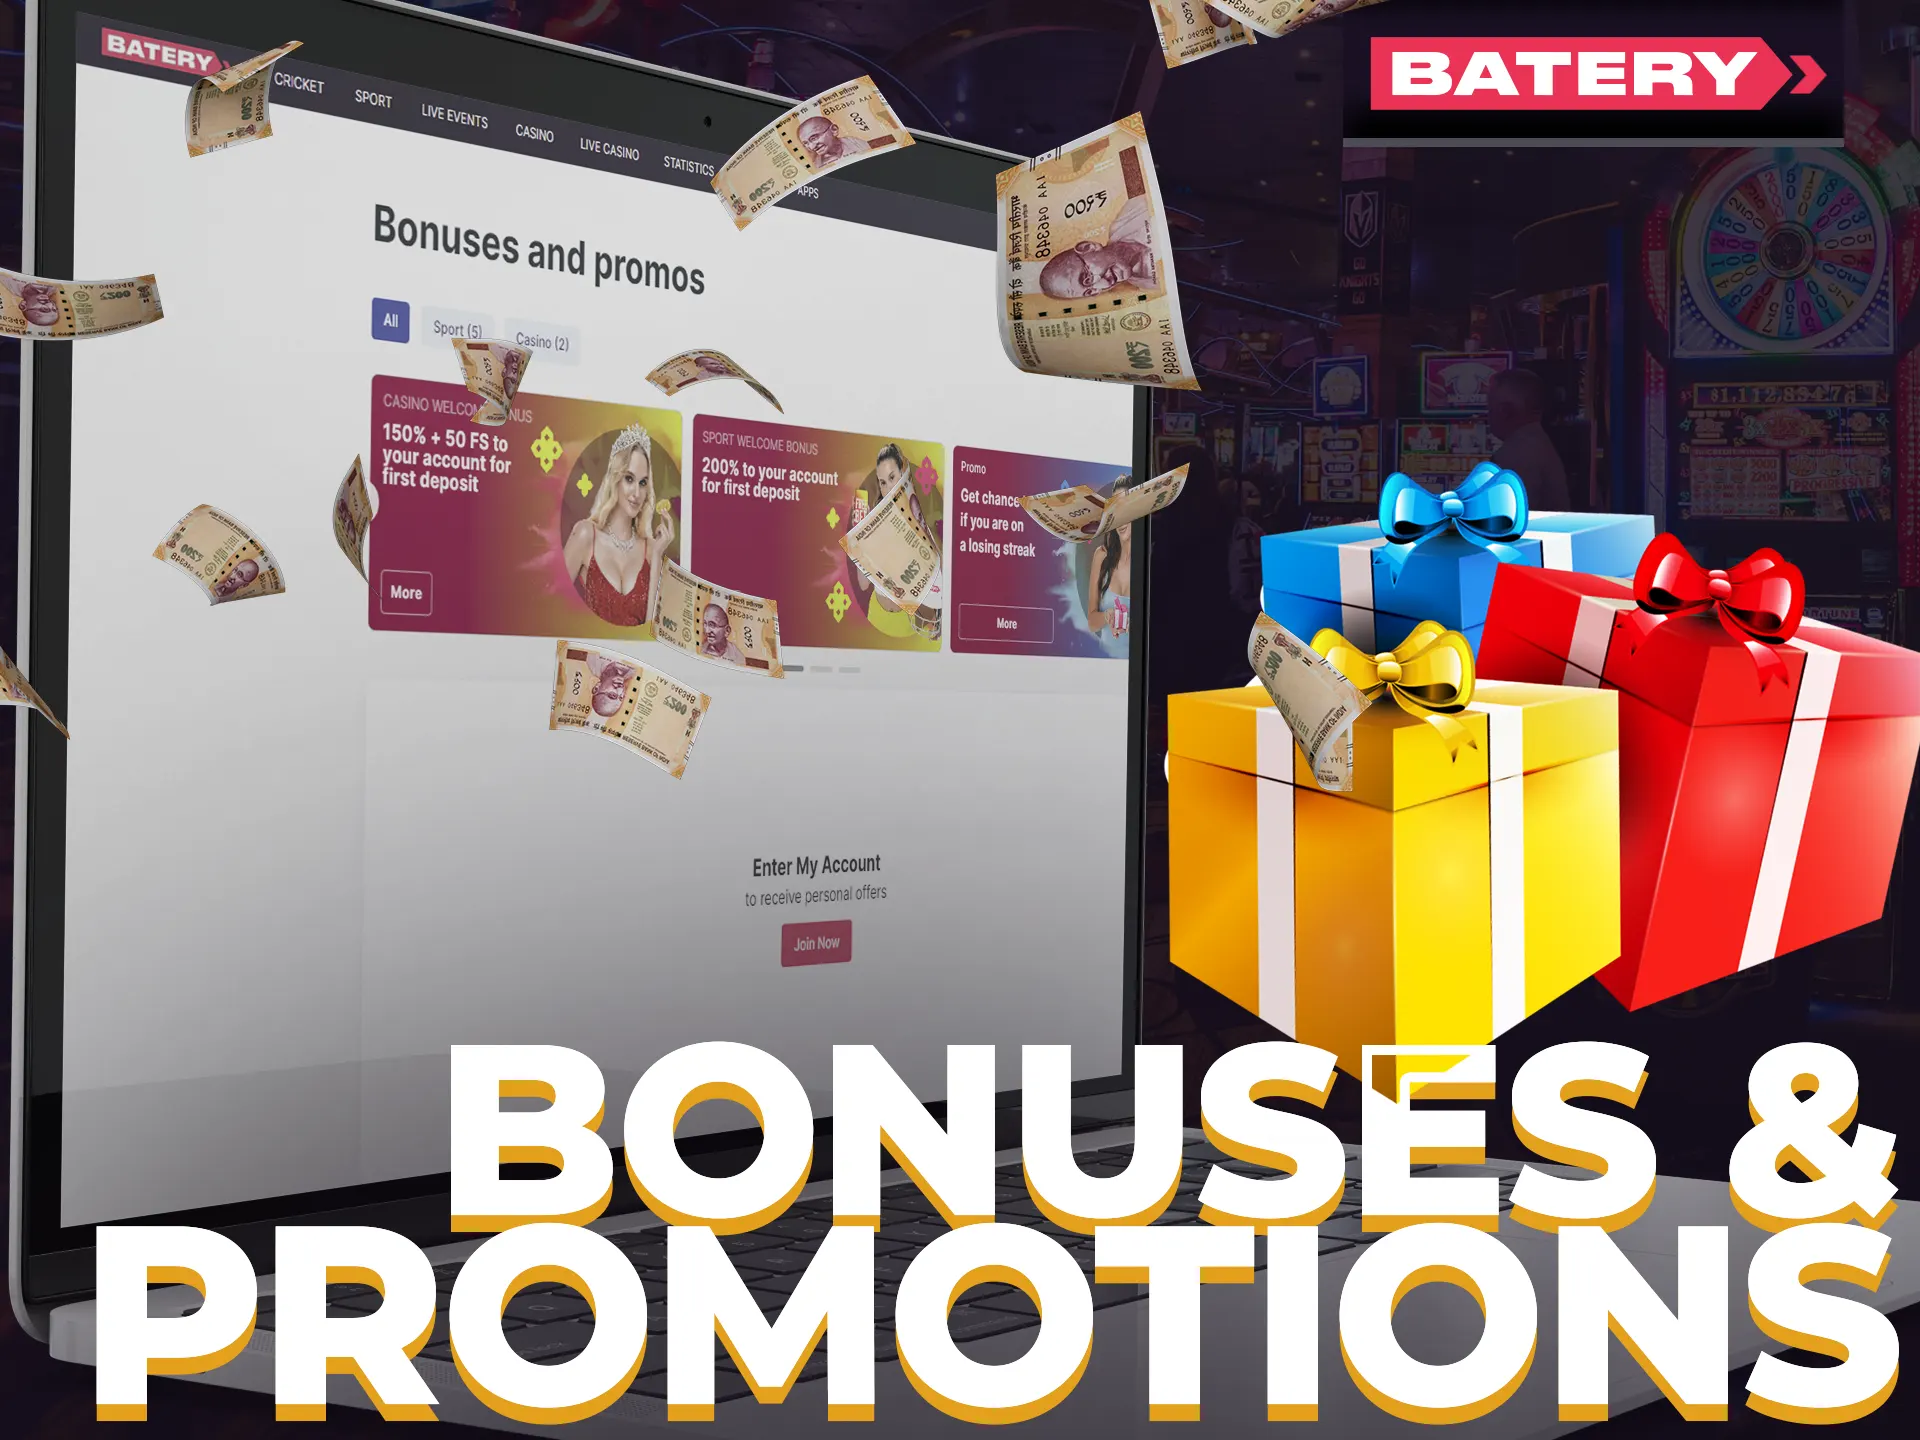 Enjoy big amazing bonuses with the Batery for an amazing gambling and betting experience.